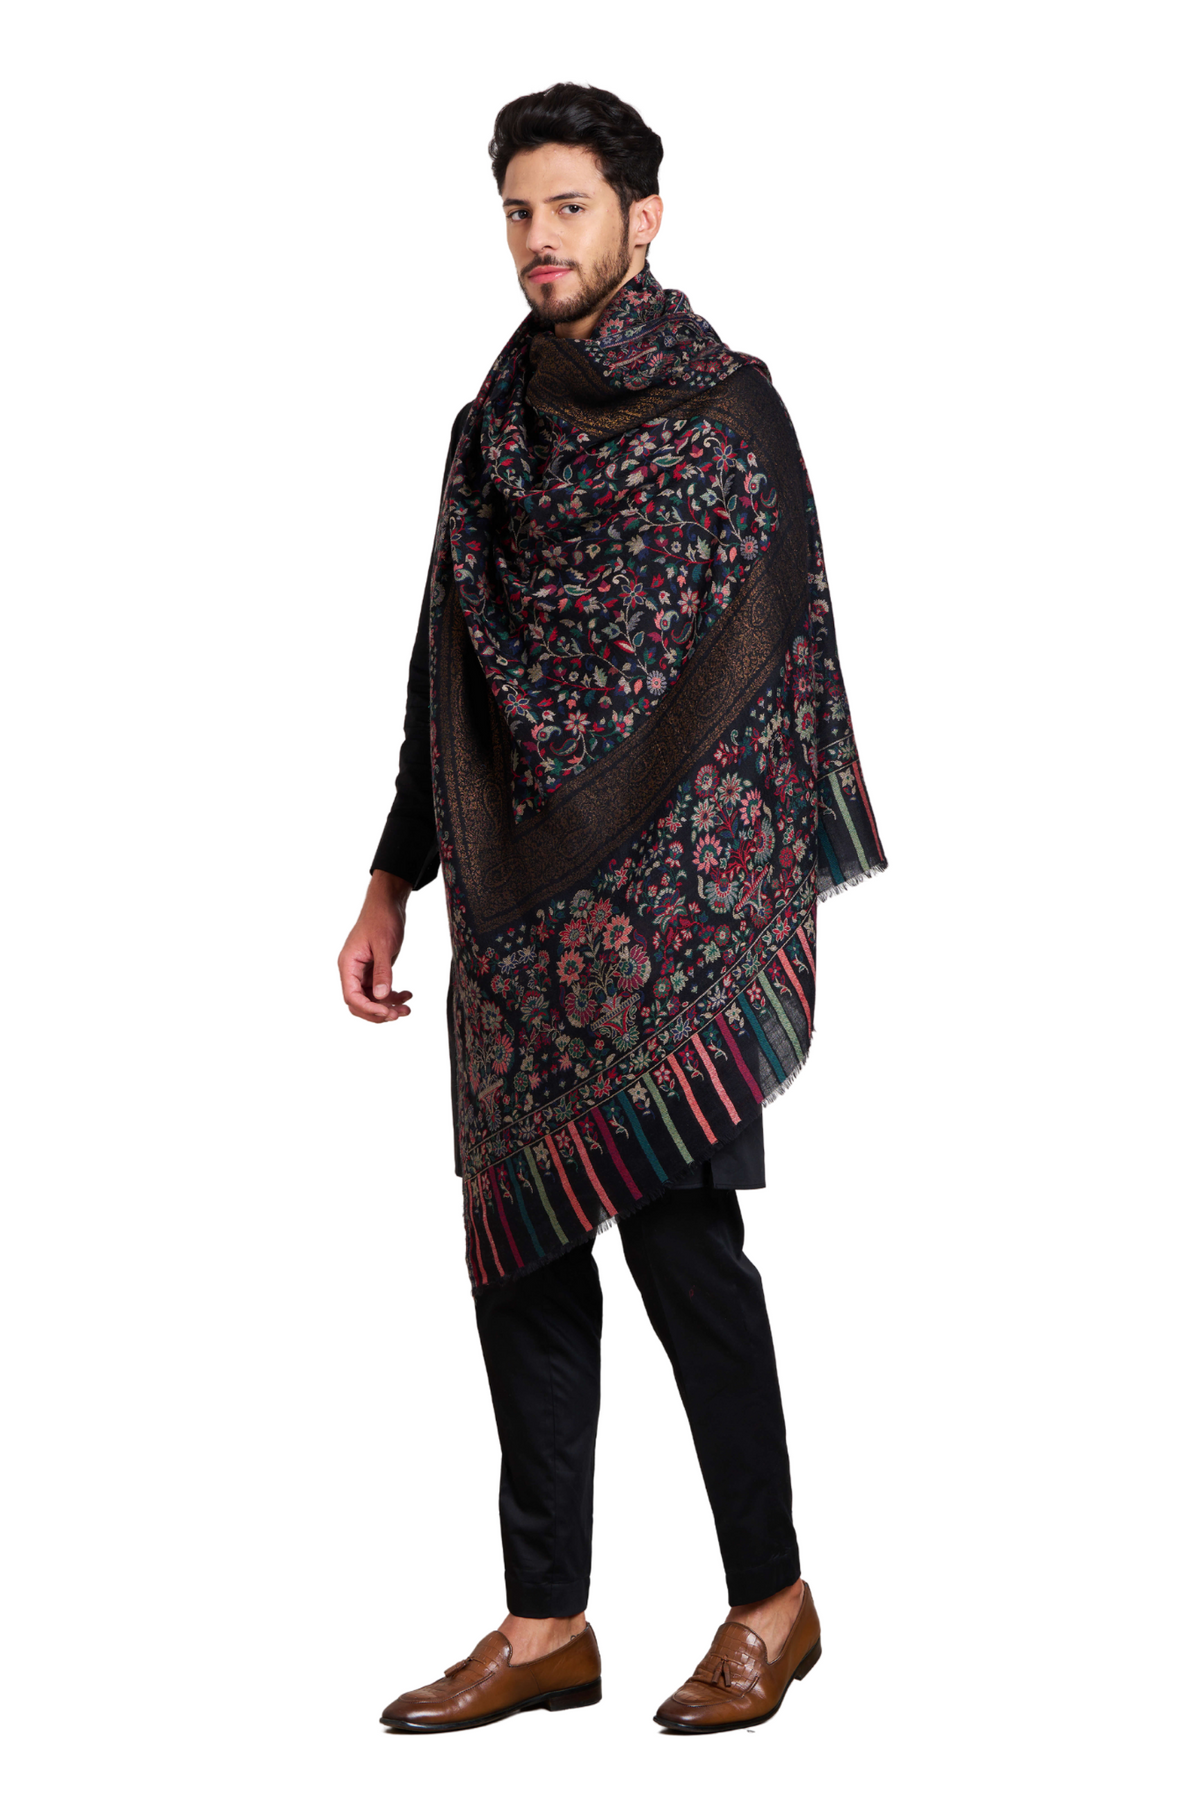 Exclusive Pashmina Kaani Shawl for Him or Her (Unisex Stole )